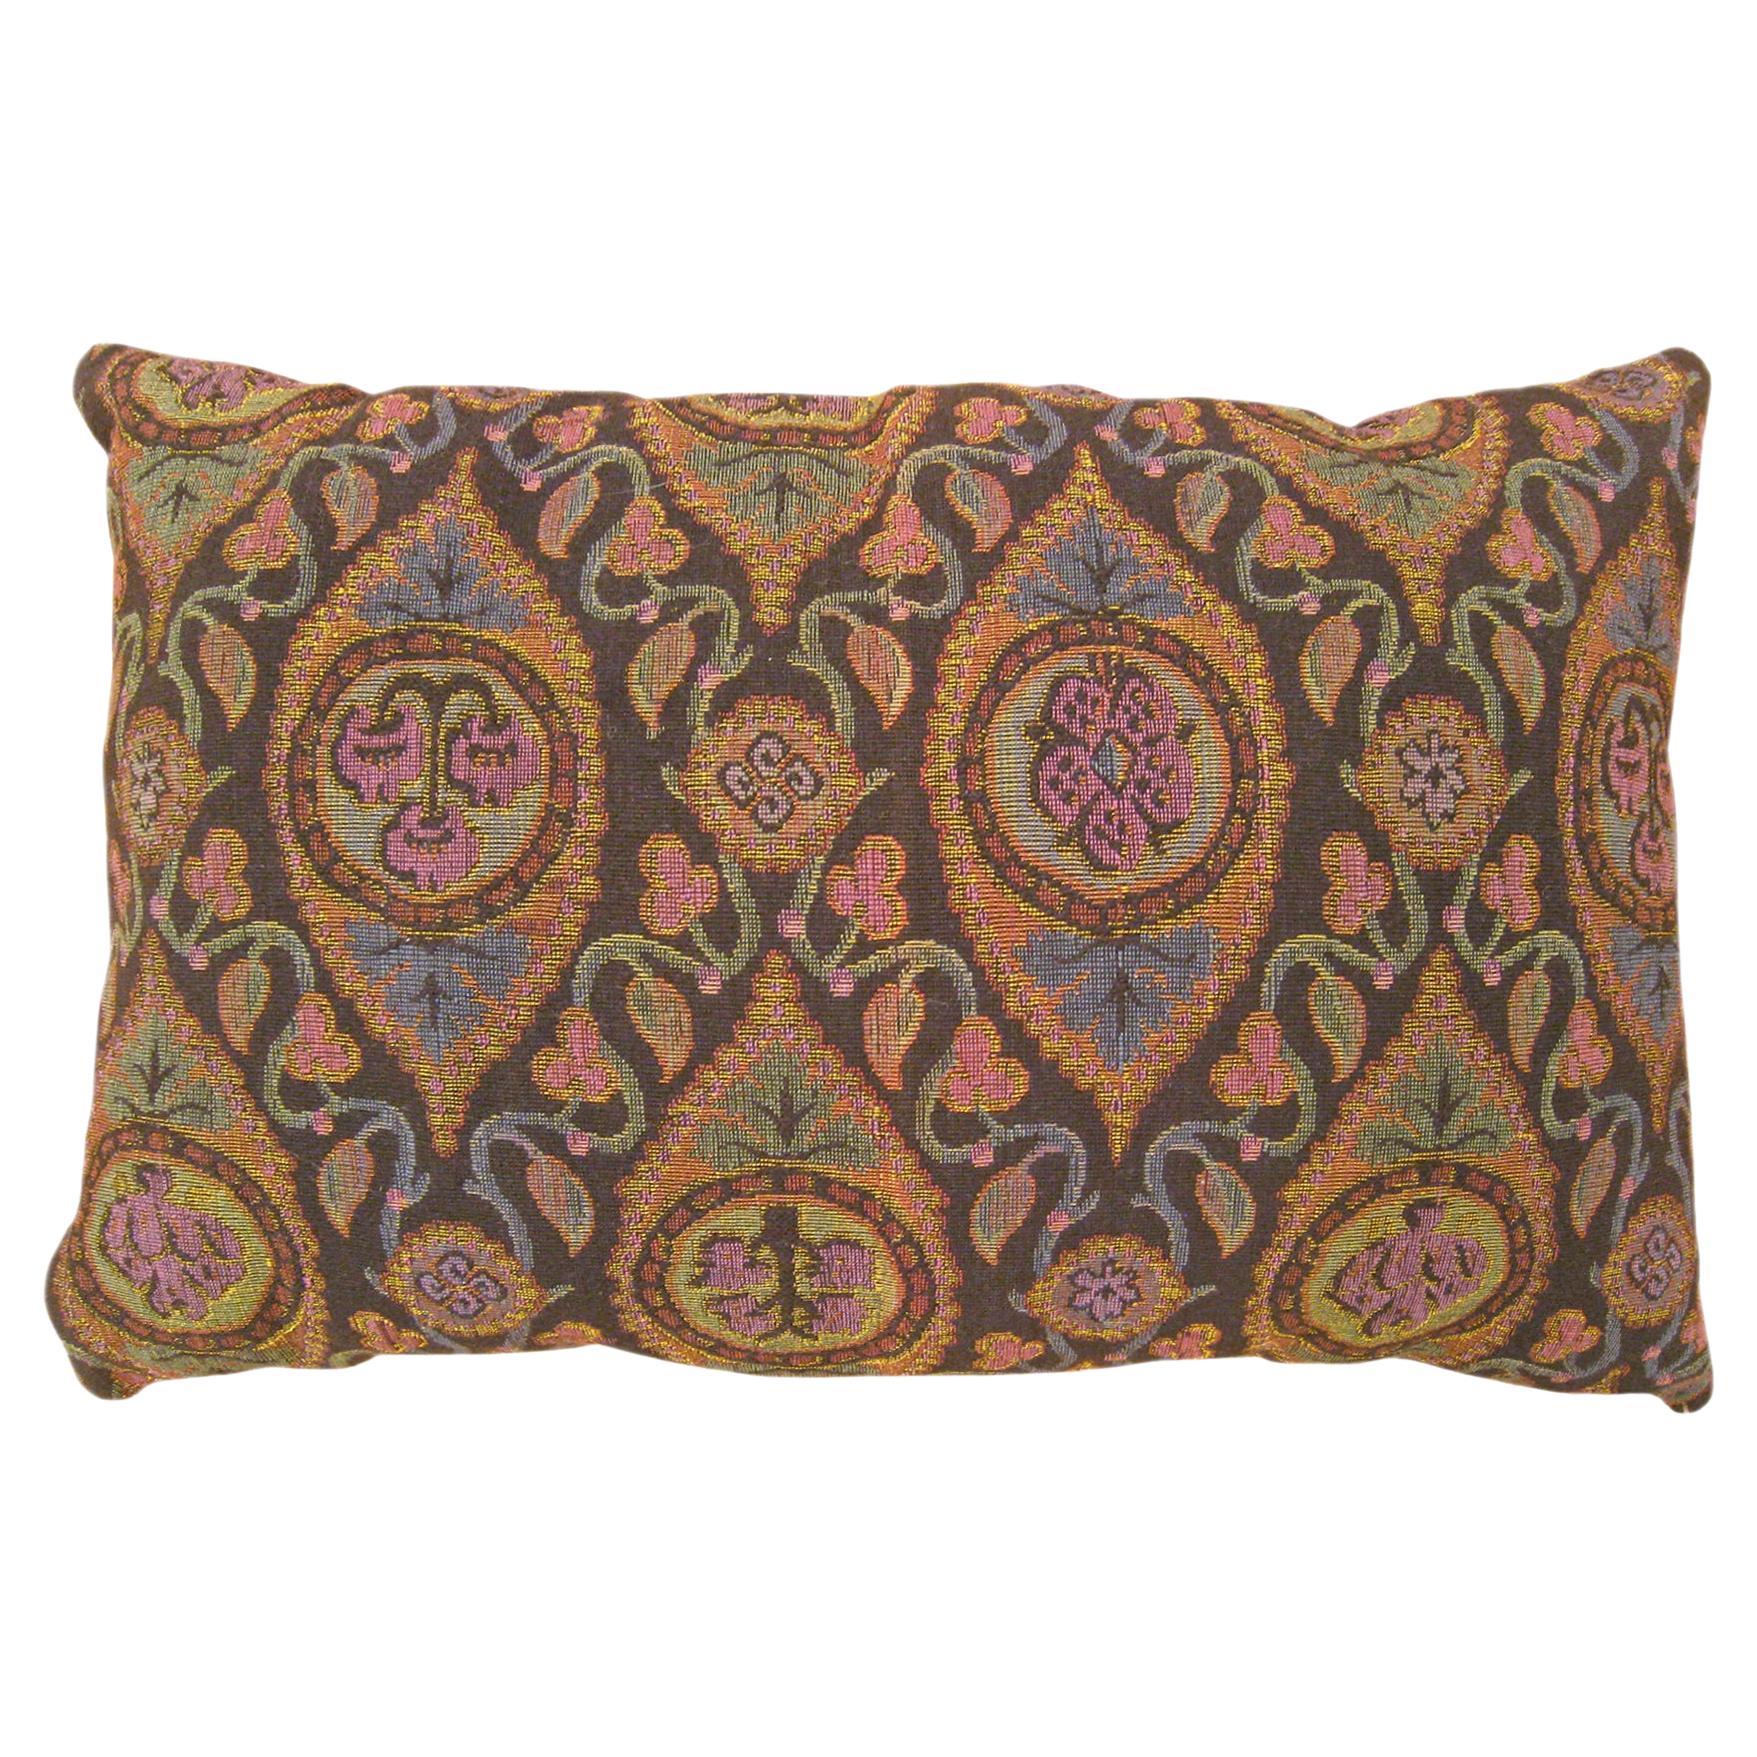 Decorative Antique Jacquard Tapestry Pillow with Floral Elements Allover  For Sale